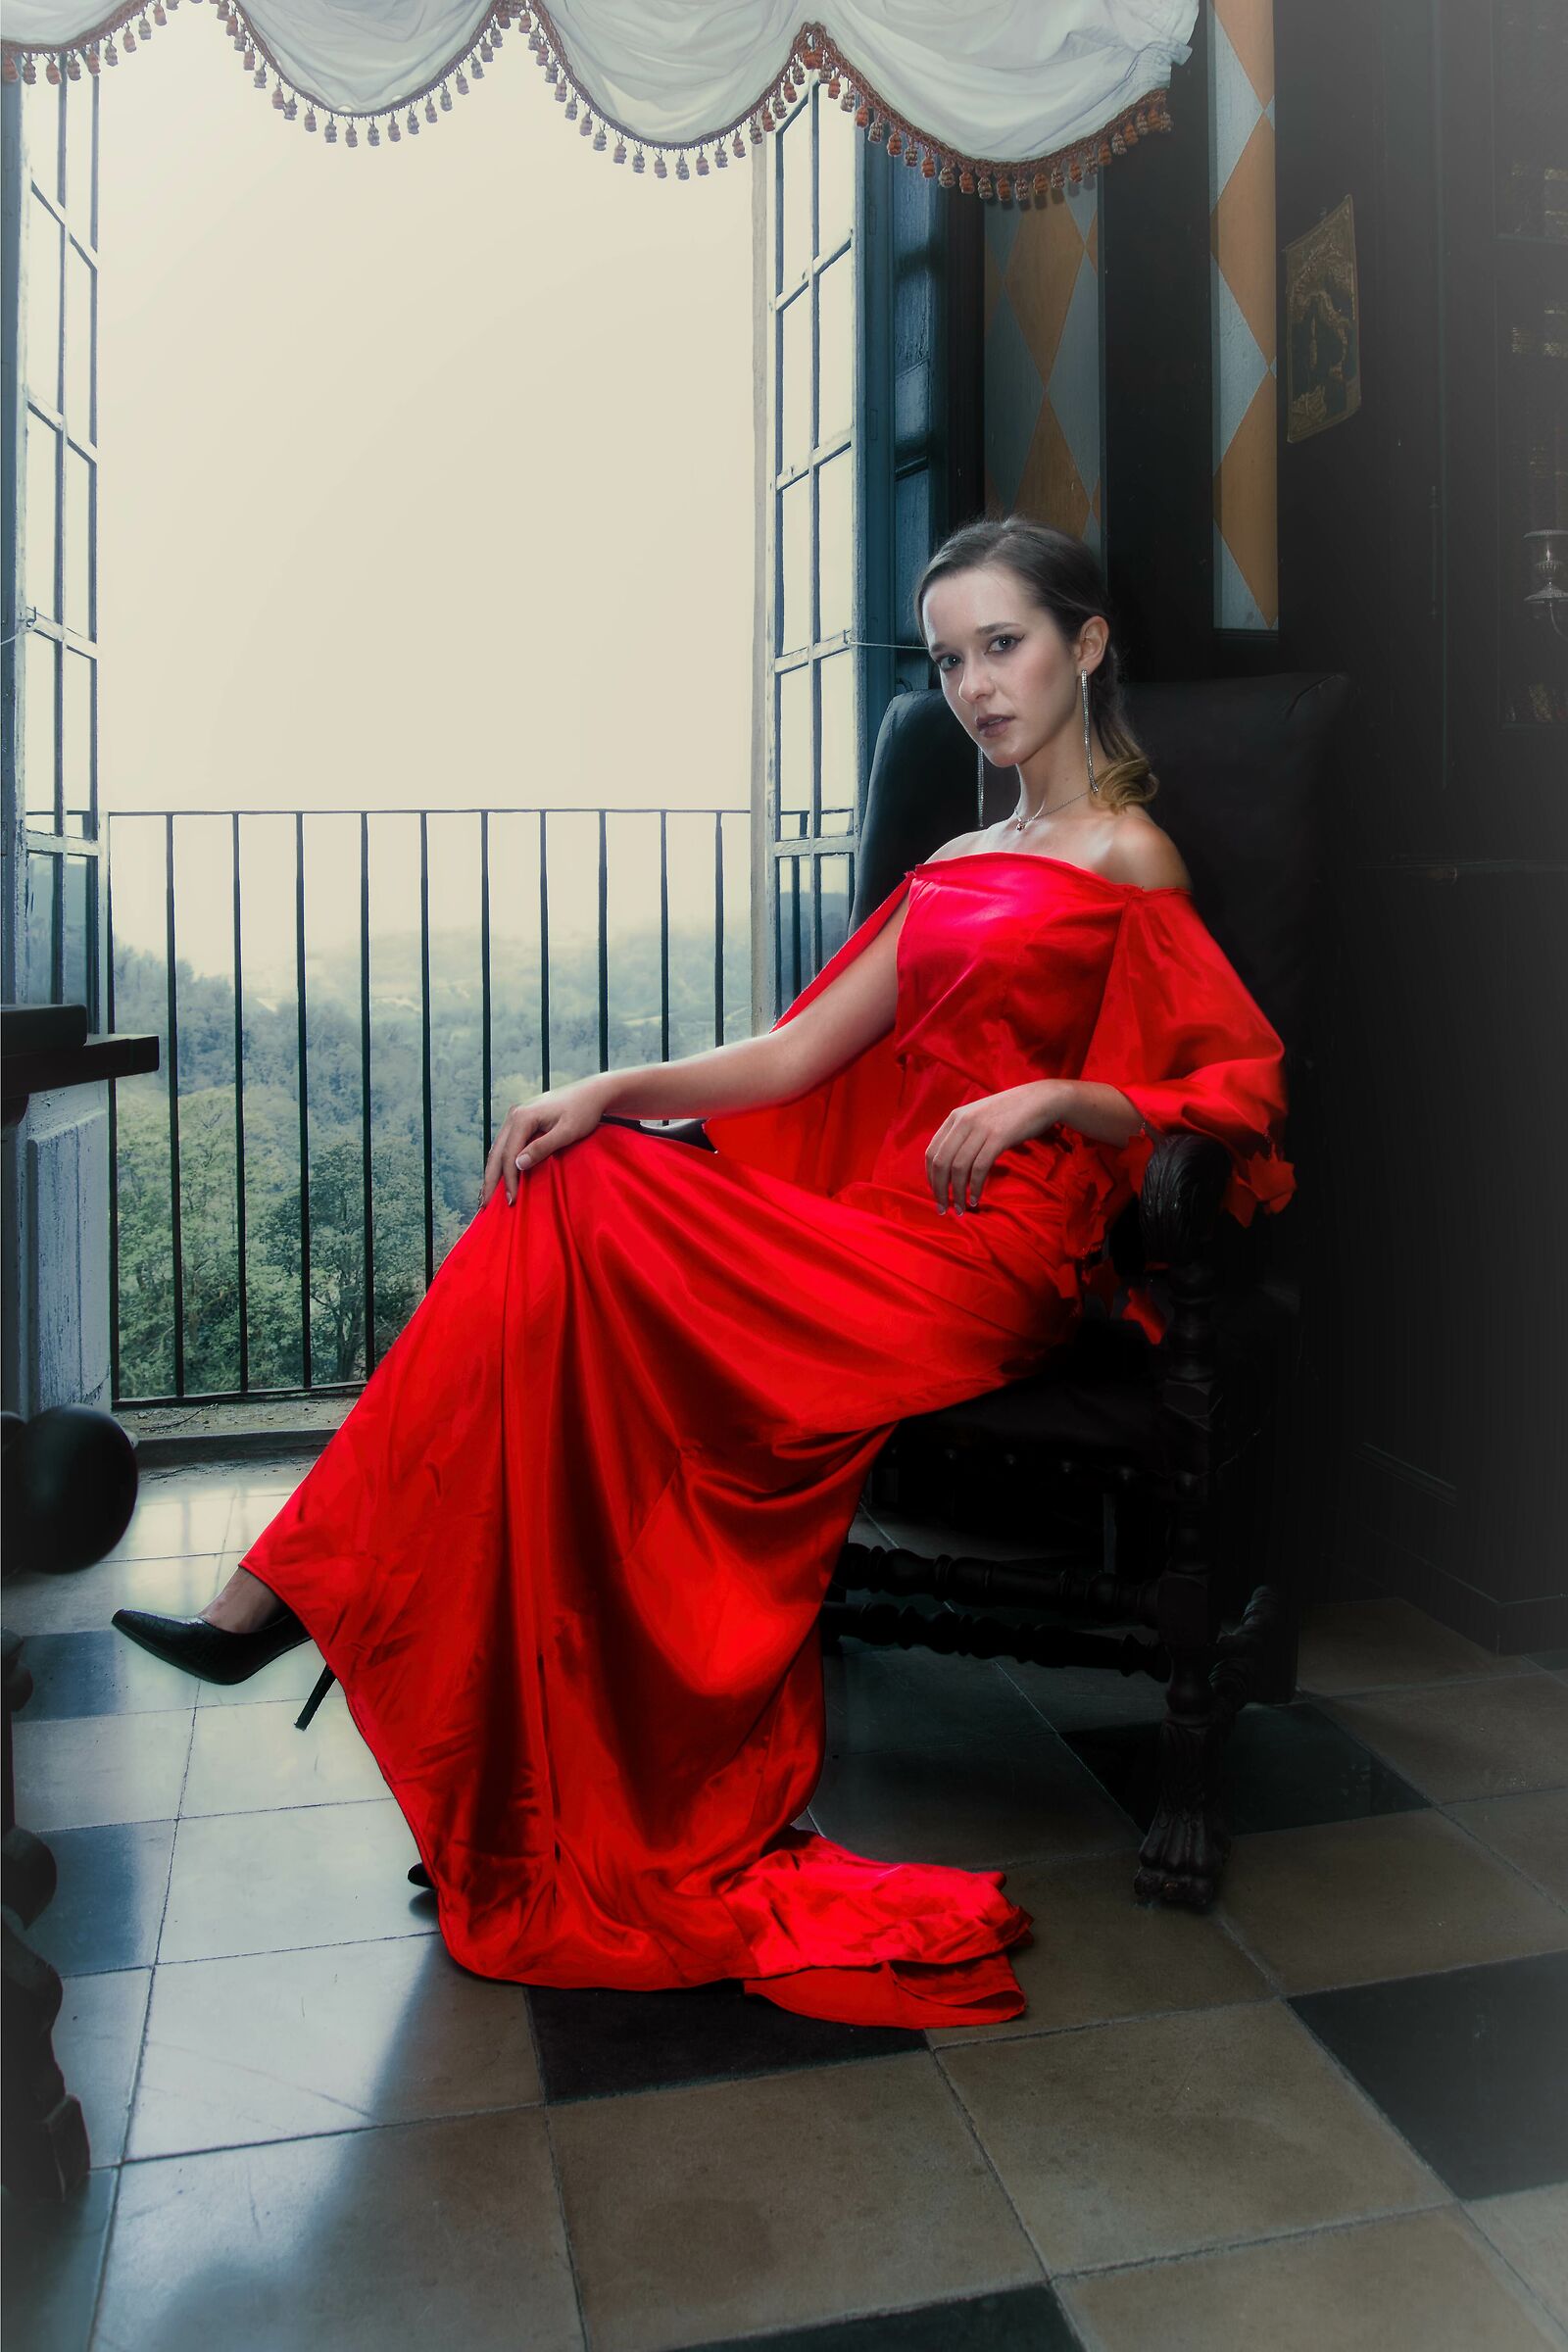 the woman in red...